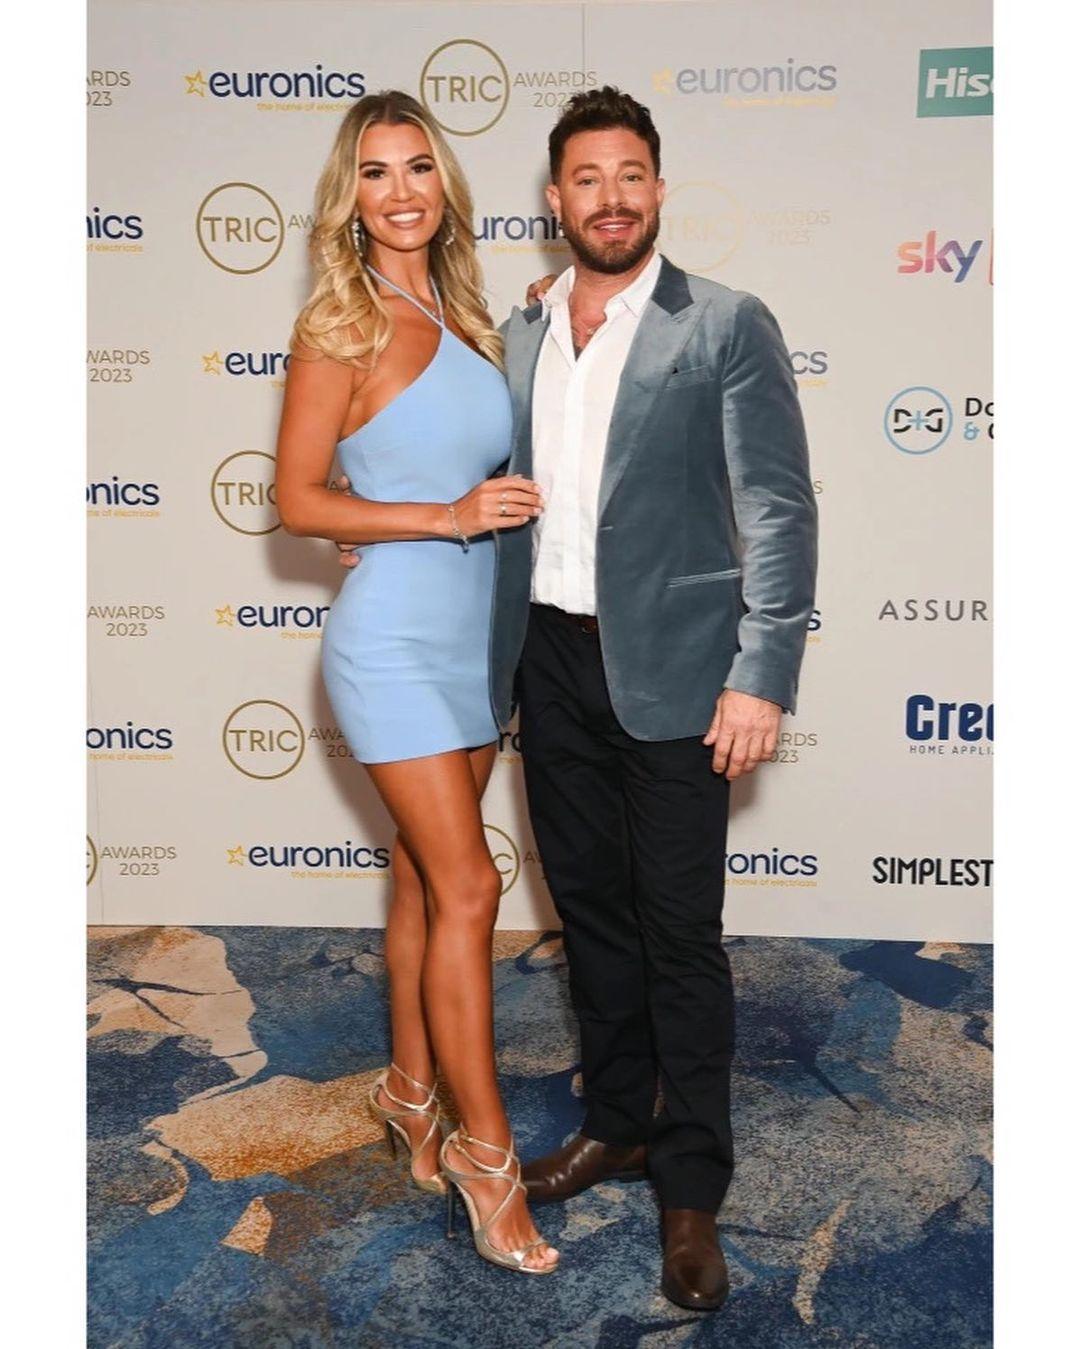 Christine McGuinness' Endless Legs Is Front & Center As She Stuns In Blue Skimpy Dress